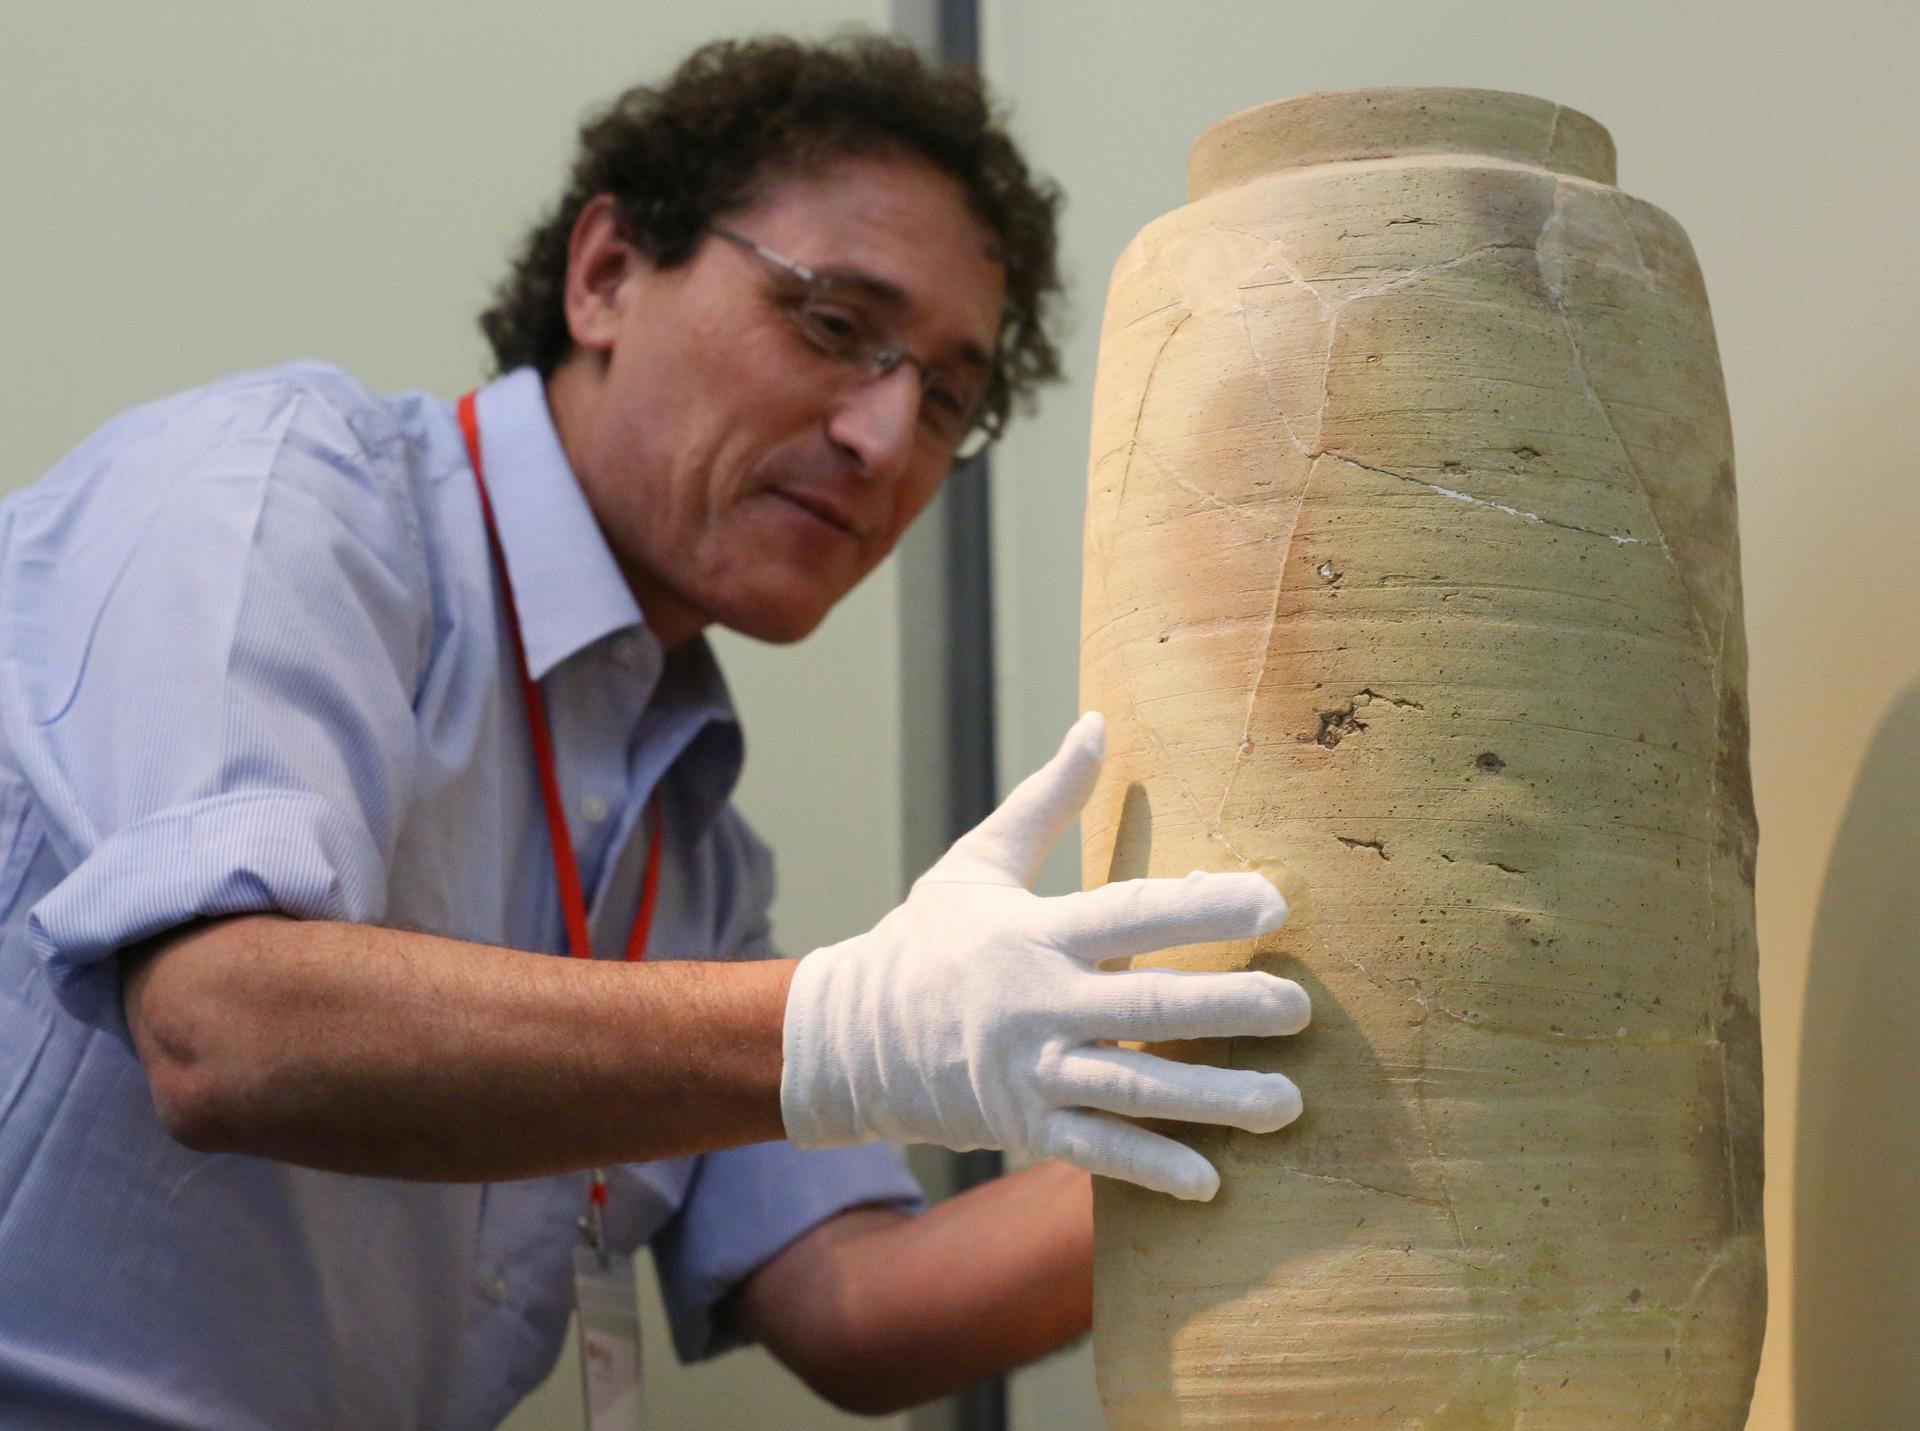 Dr. Adolfo Roitman, Curator of the Dead Sea Scrolls at The Israel Museum, Jerusalem shows the Scroll Jar during media preview of Temple, Scrolls and Divine Messengers: Archeology of the Land of Israel in Roman Times at Asia Society Hong Kong Center in Admiralty. 30OCT14